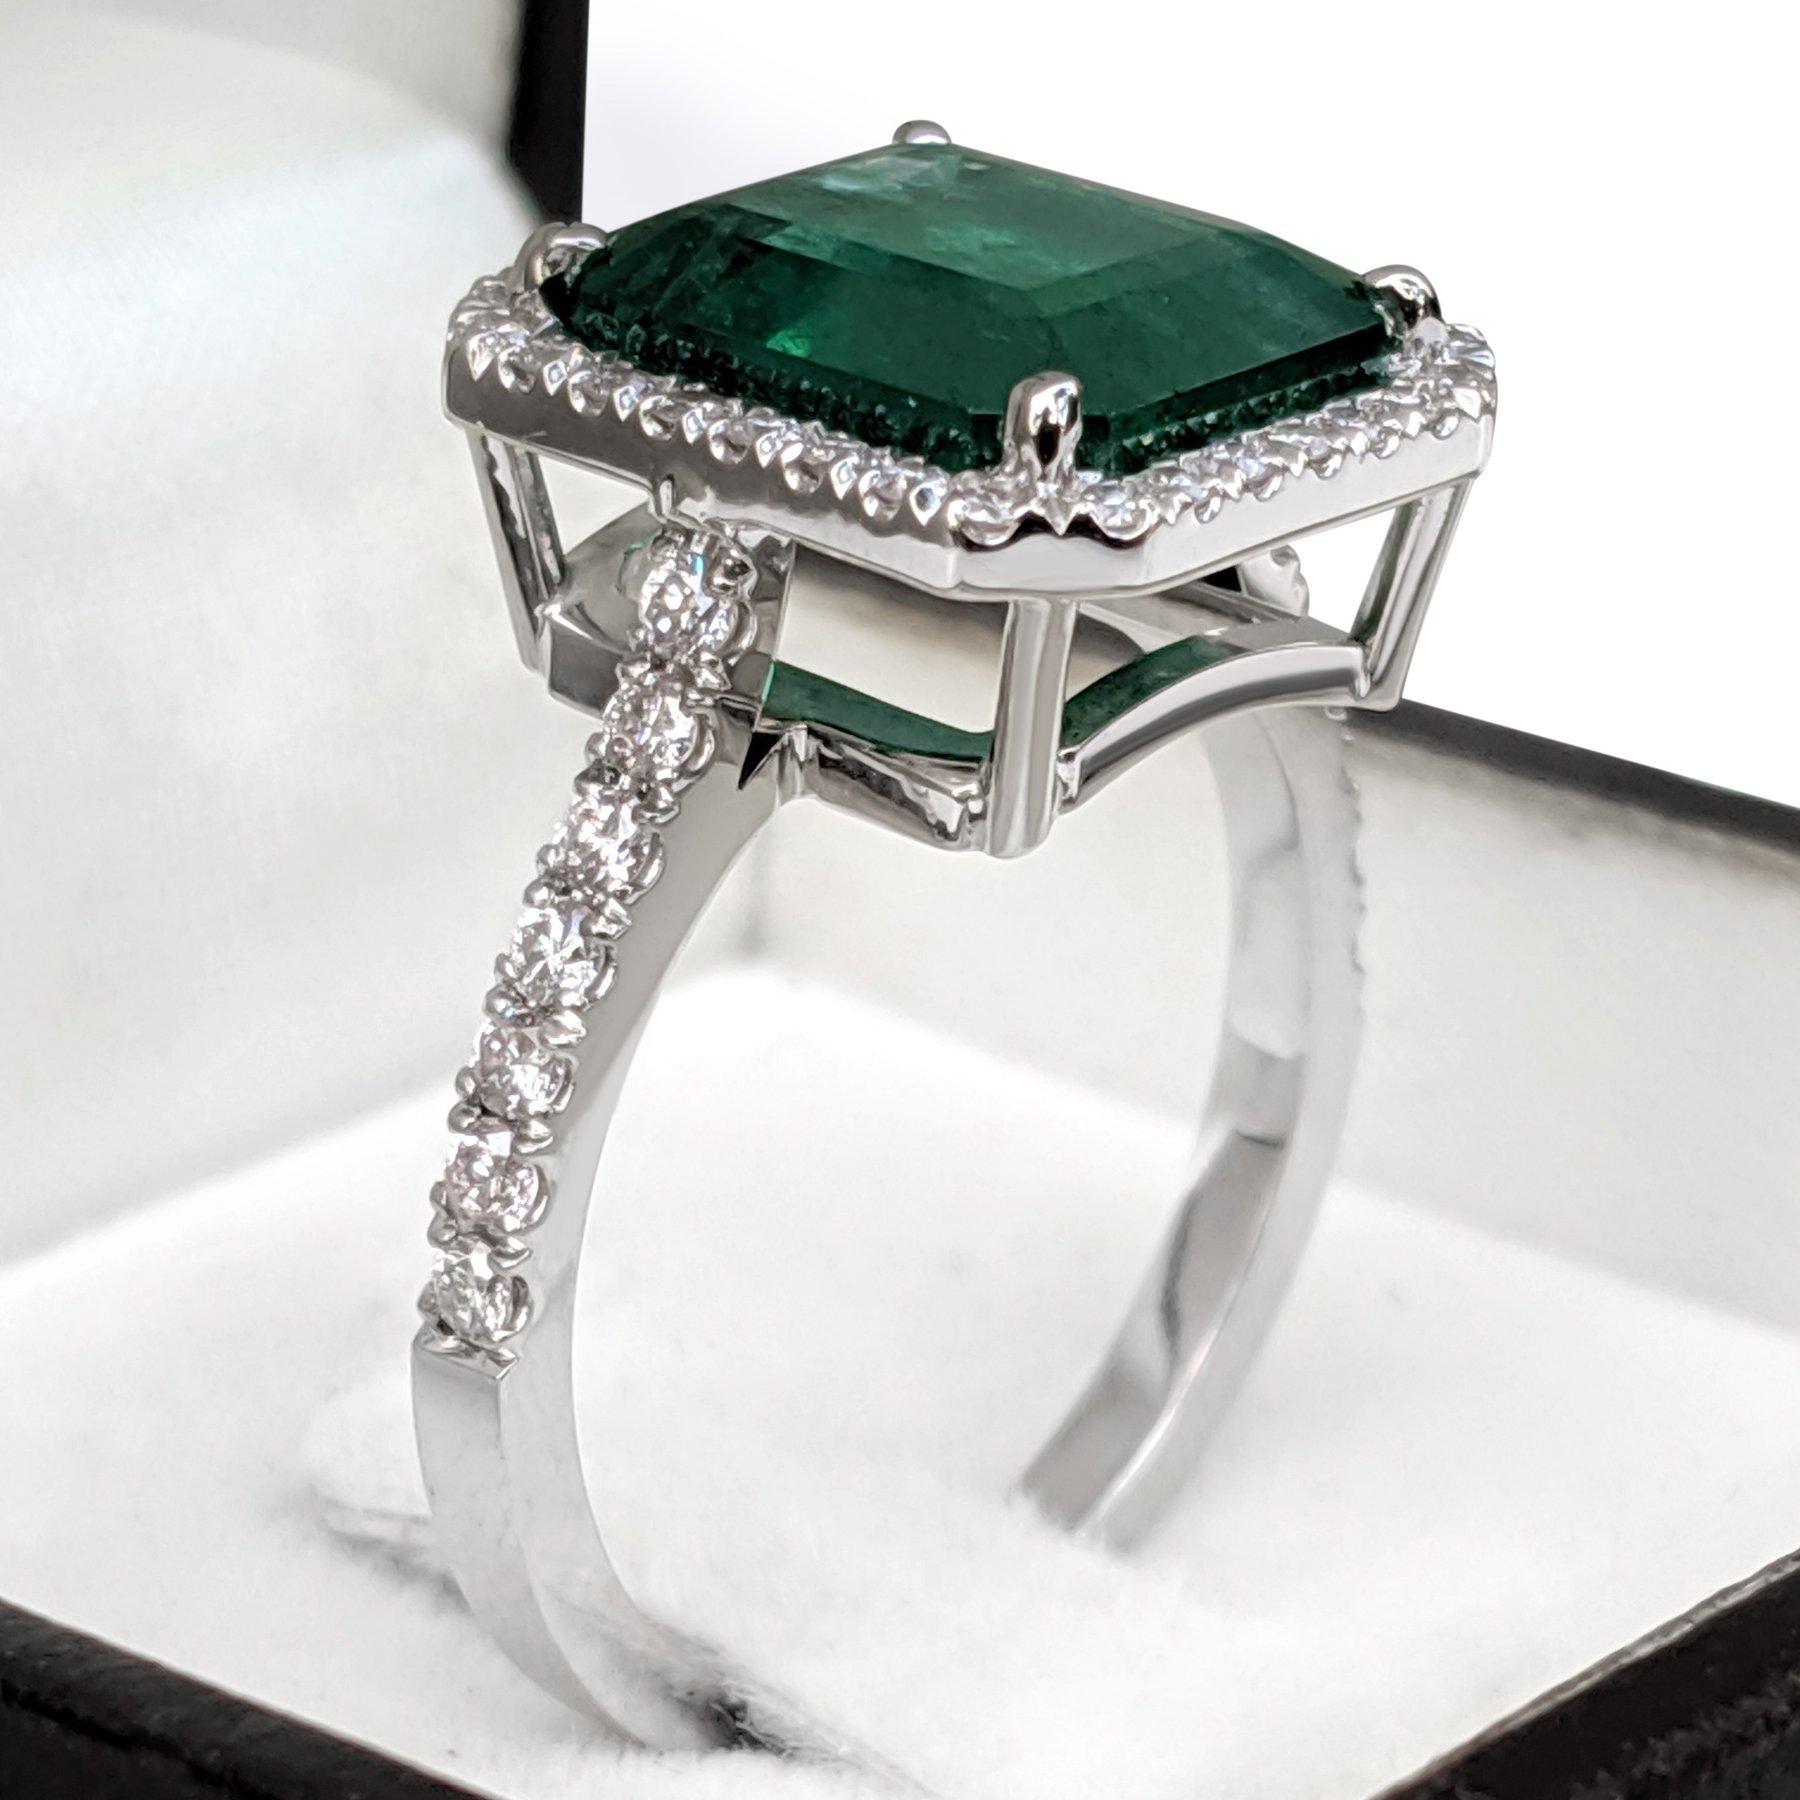 Ring can be resized free of charge prior to shipping out.
Ring Size: 56 EU

Center Natural Emerald:
Weight: 4.83 ct
Color: Green
Shape: Cut Cornered Rectangle Step Cut
No indications of treatment

Side Stone Diamonds:
Weight: 0.55 ct / 44